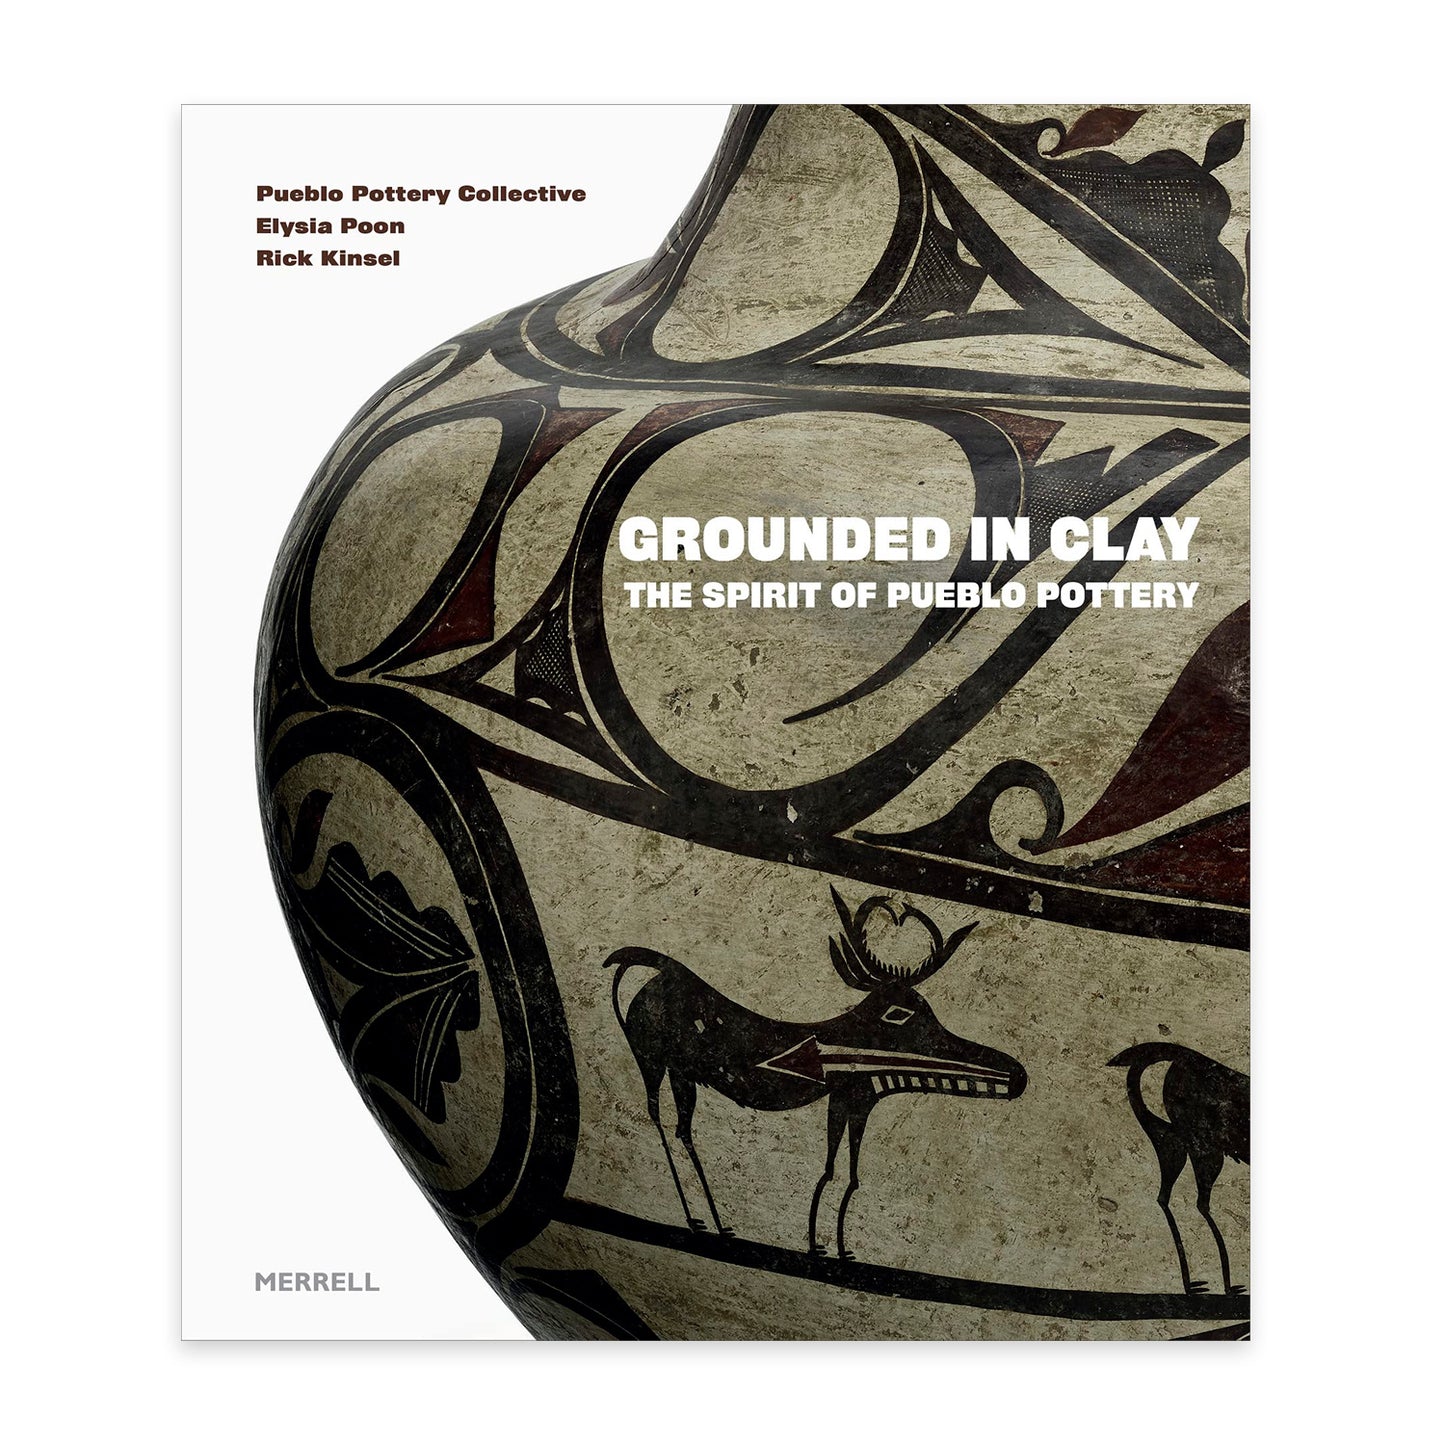 Grounded in Clay: The Spirit of Pueblo Pottery